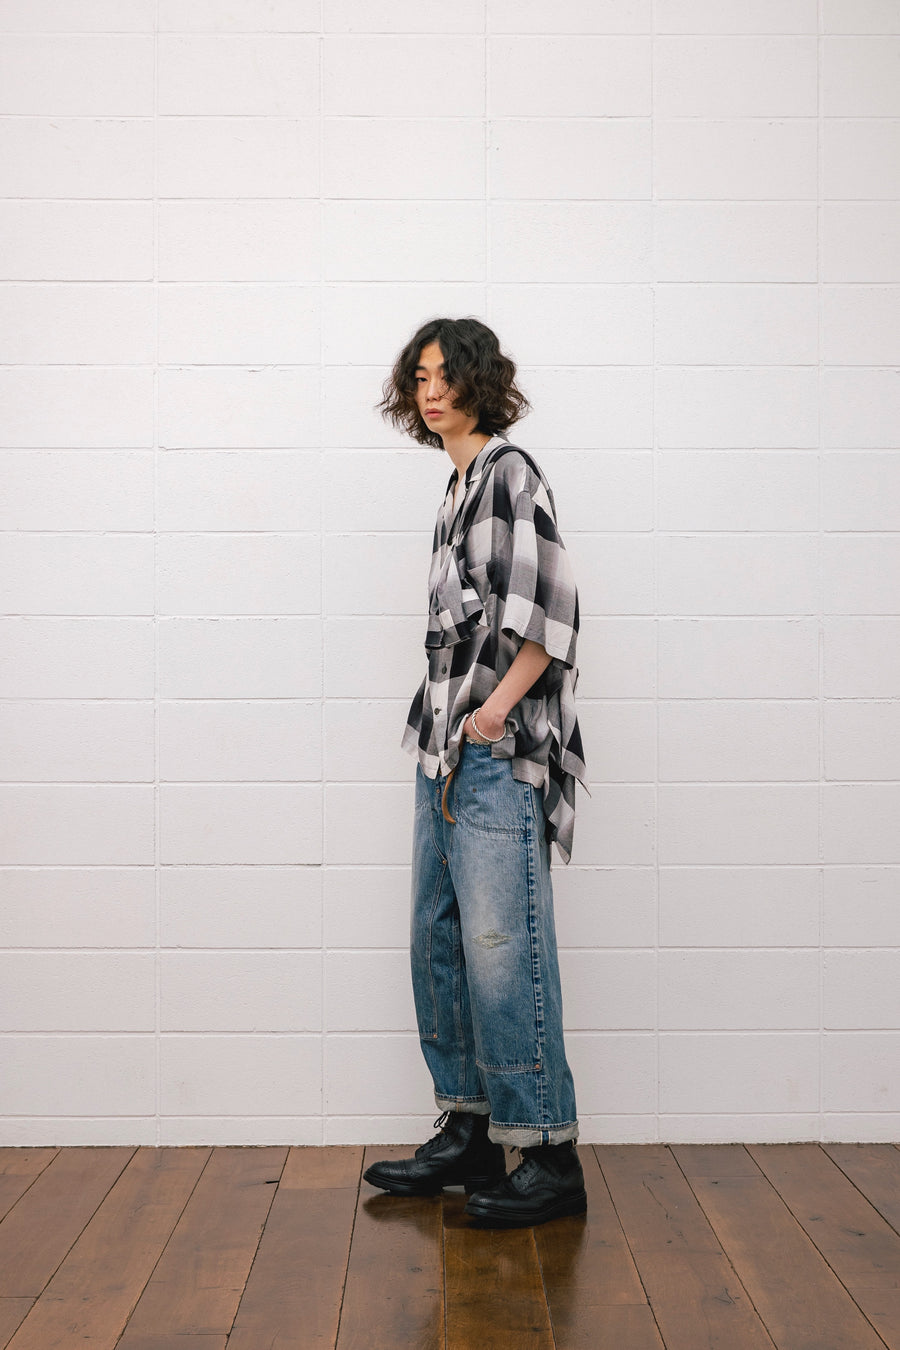 SUGARHILL(シュガーヒル)のFADED DOUBLE KNEE DENIM PANTS PRODUCTED 